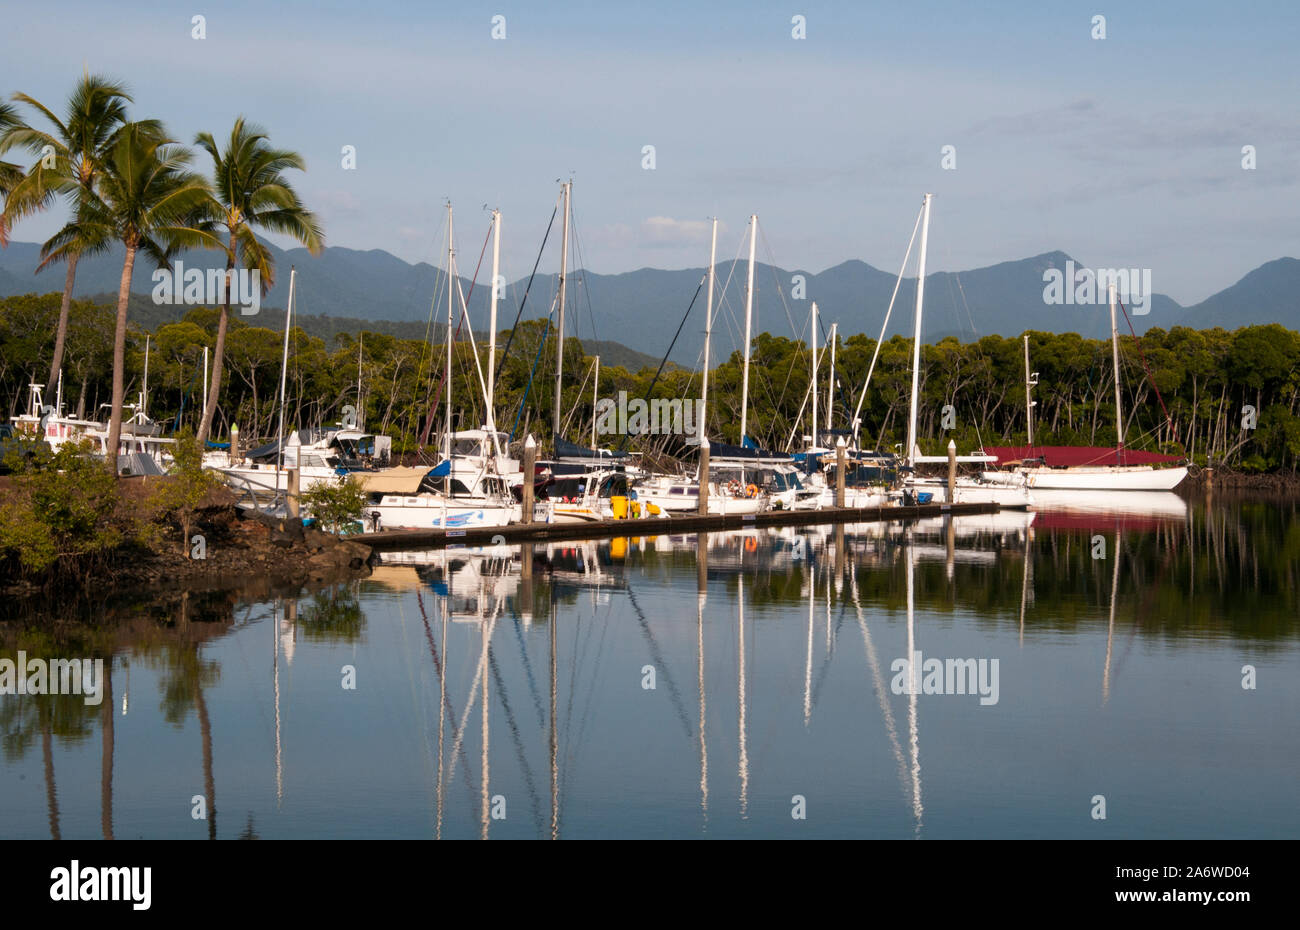 Early morning light at the Marina on Dickson's Inlet, Port Douglas, an upscale tourist destination in tropical North Queensland, Australia Stock Photo